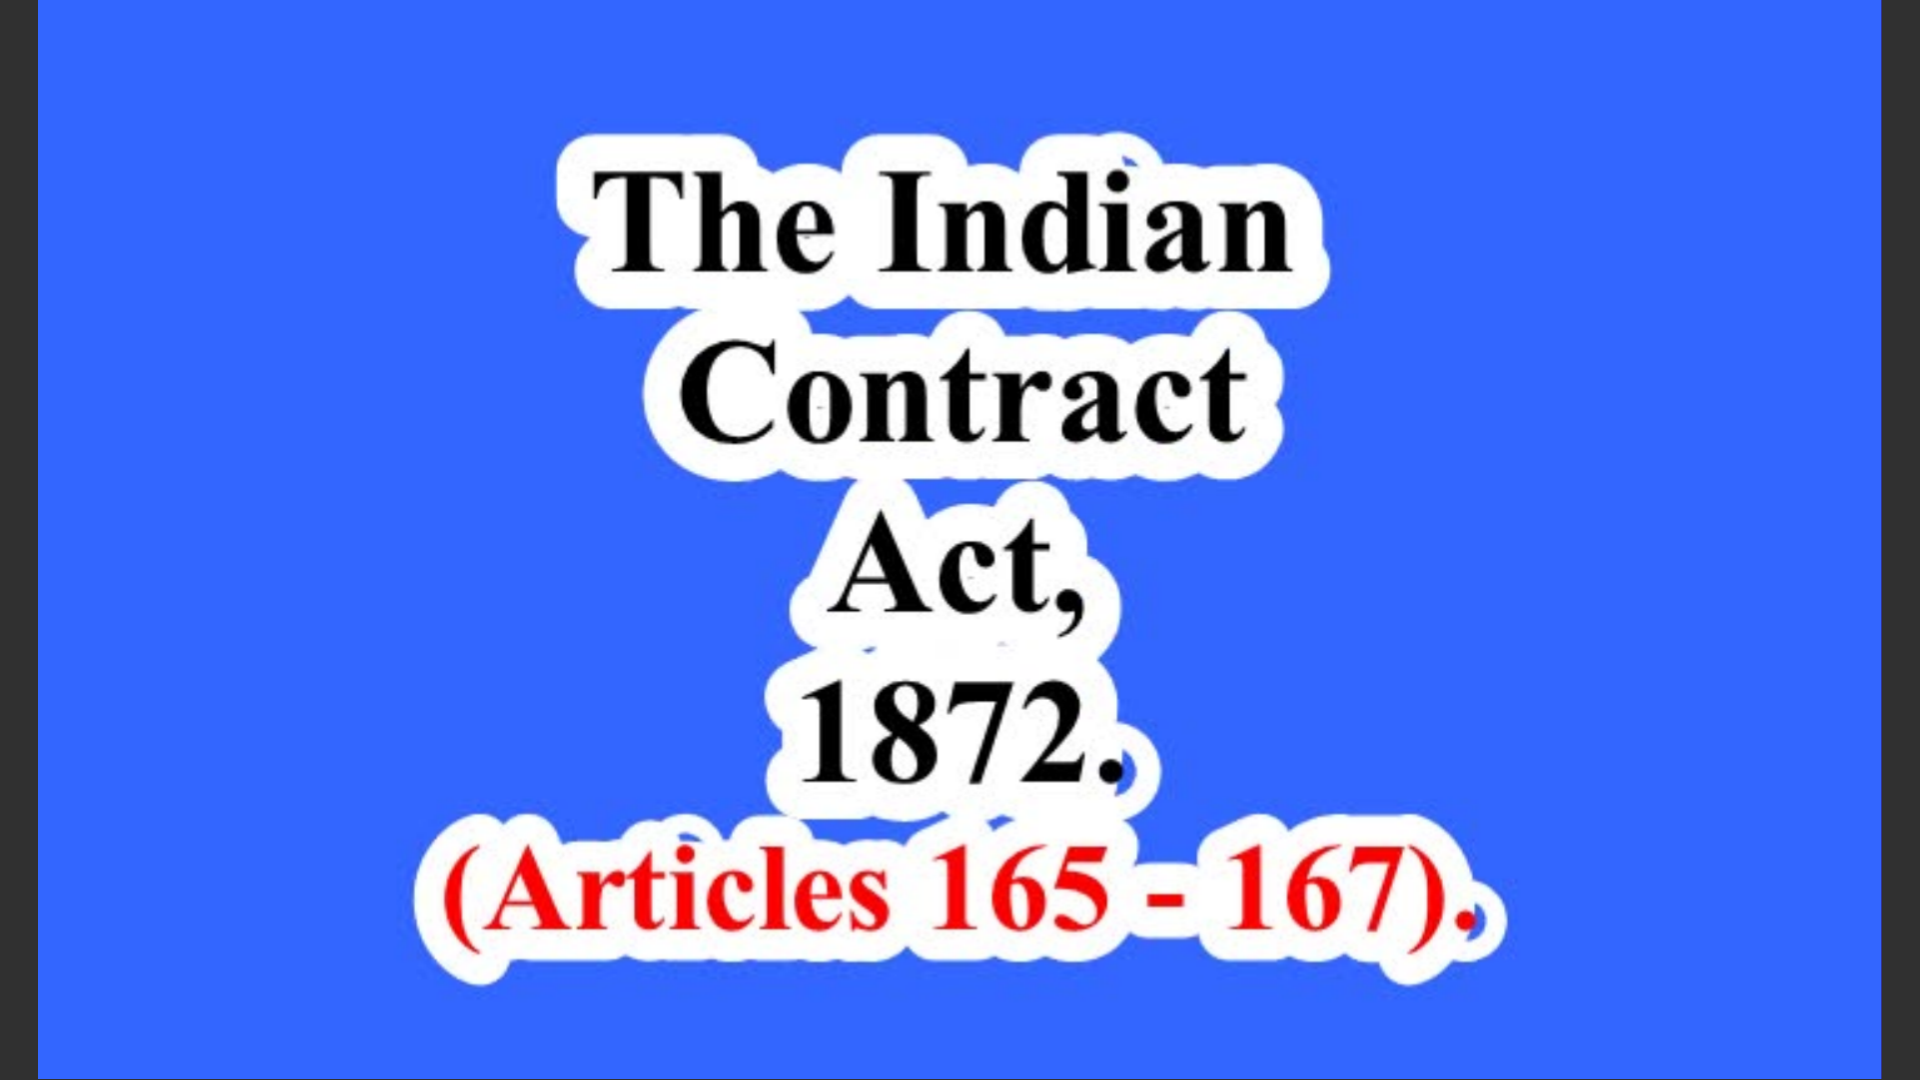 The Indian Contract Act, 1872. (Articles 165 – 167).